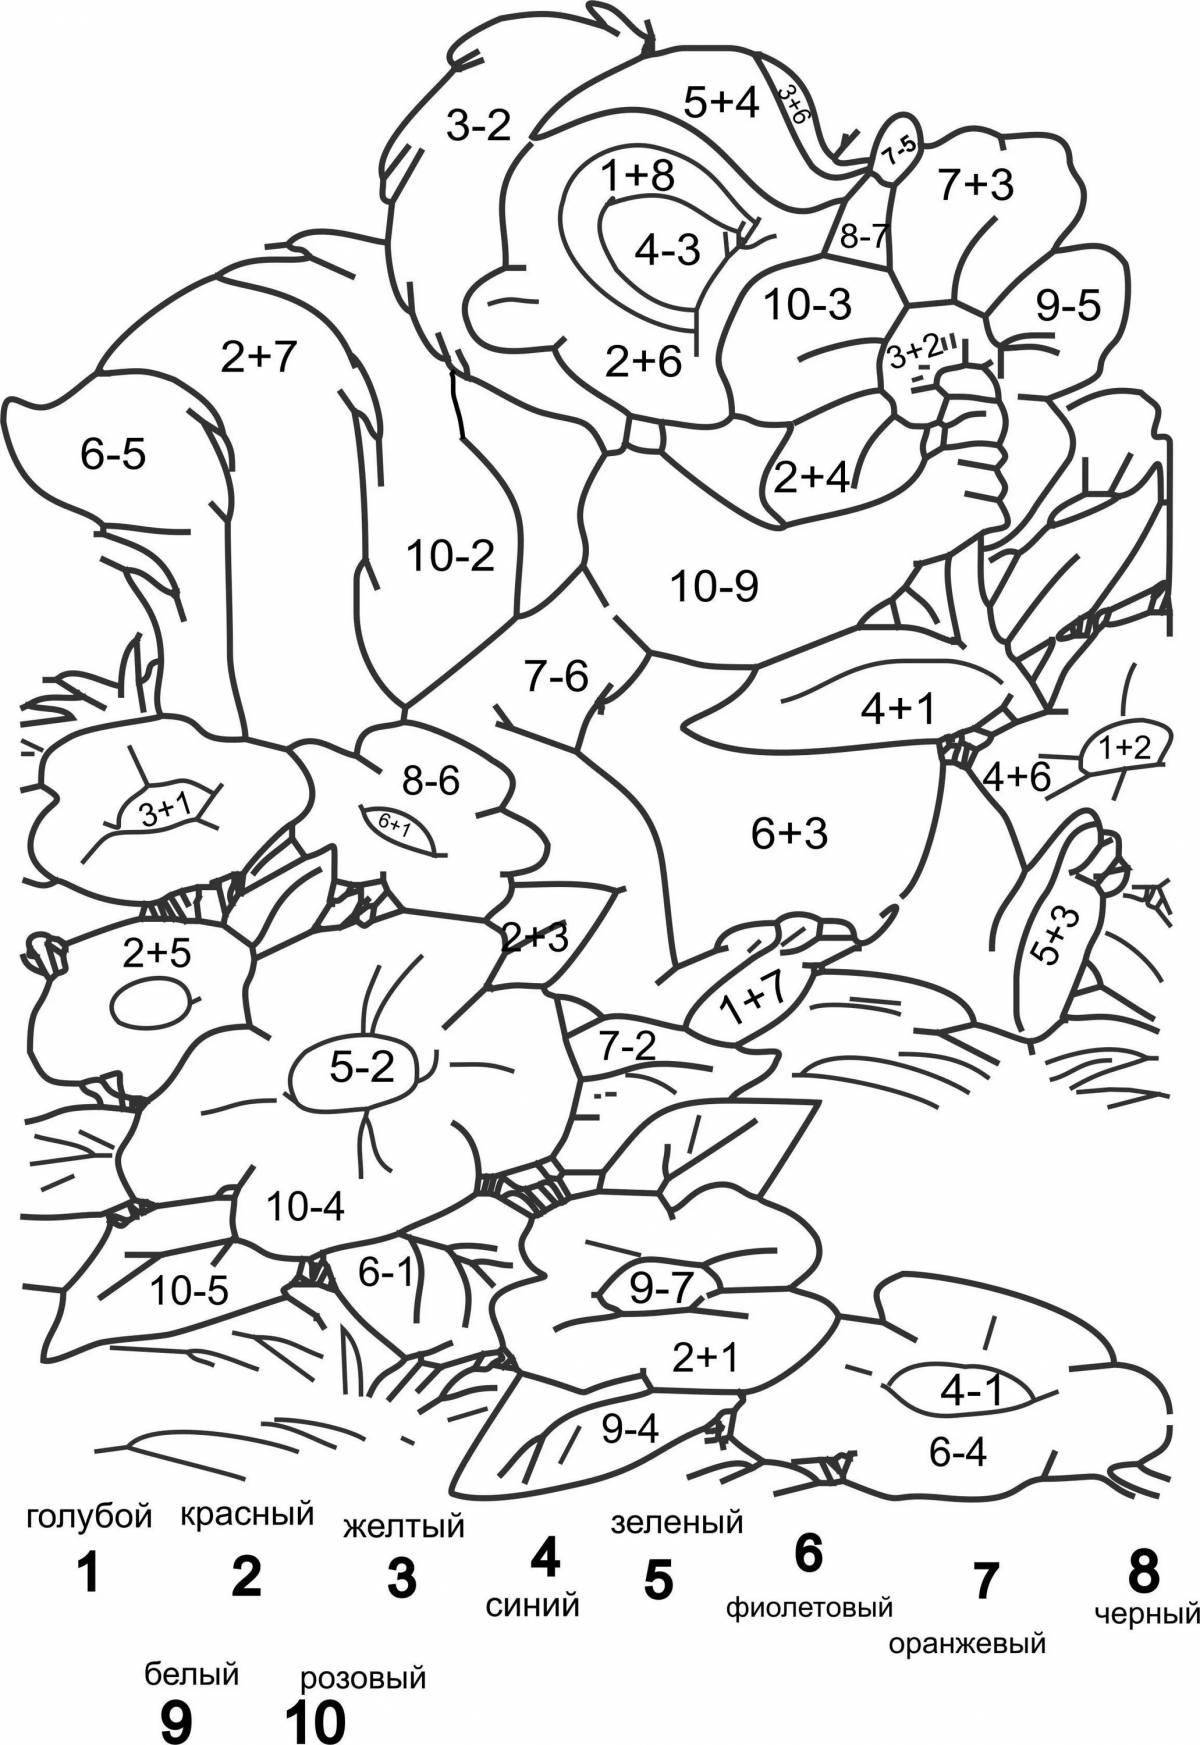 Bright coloring 2 classes by numbers